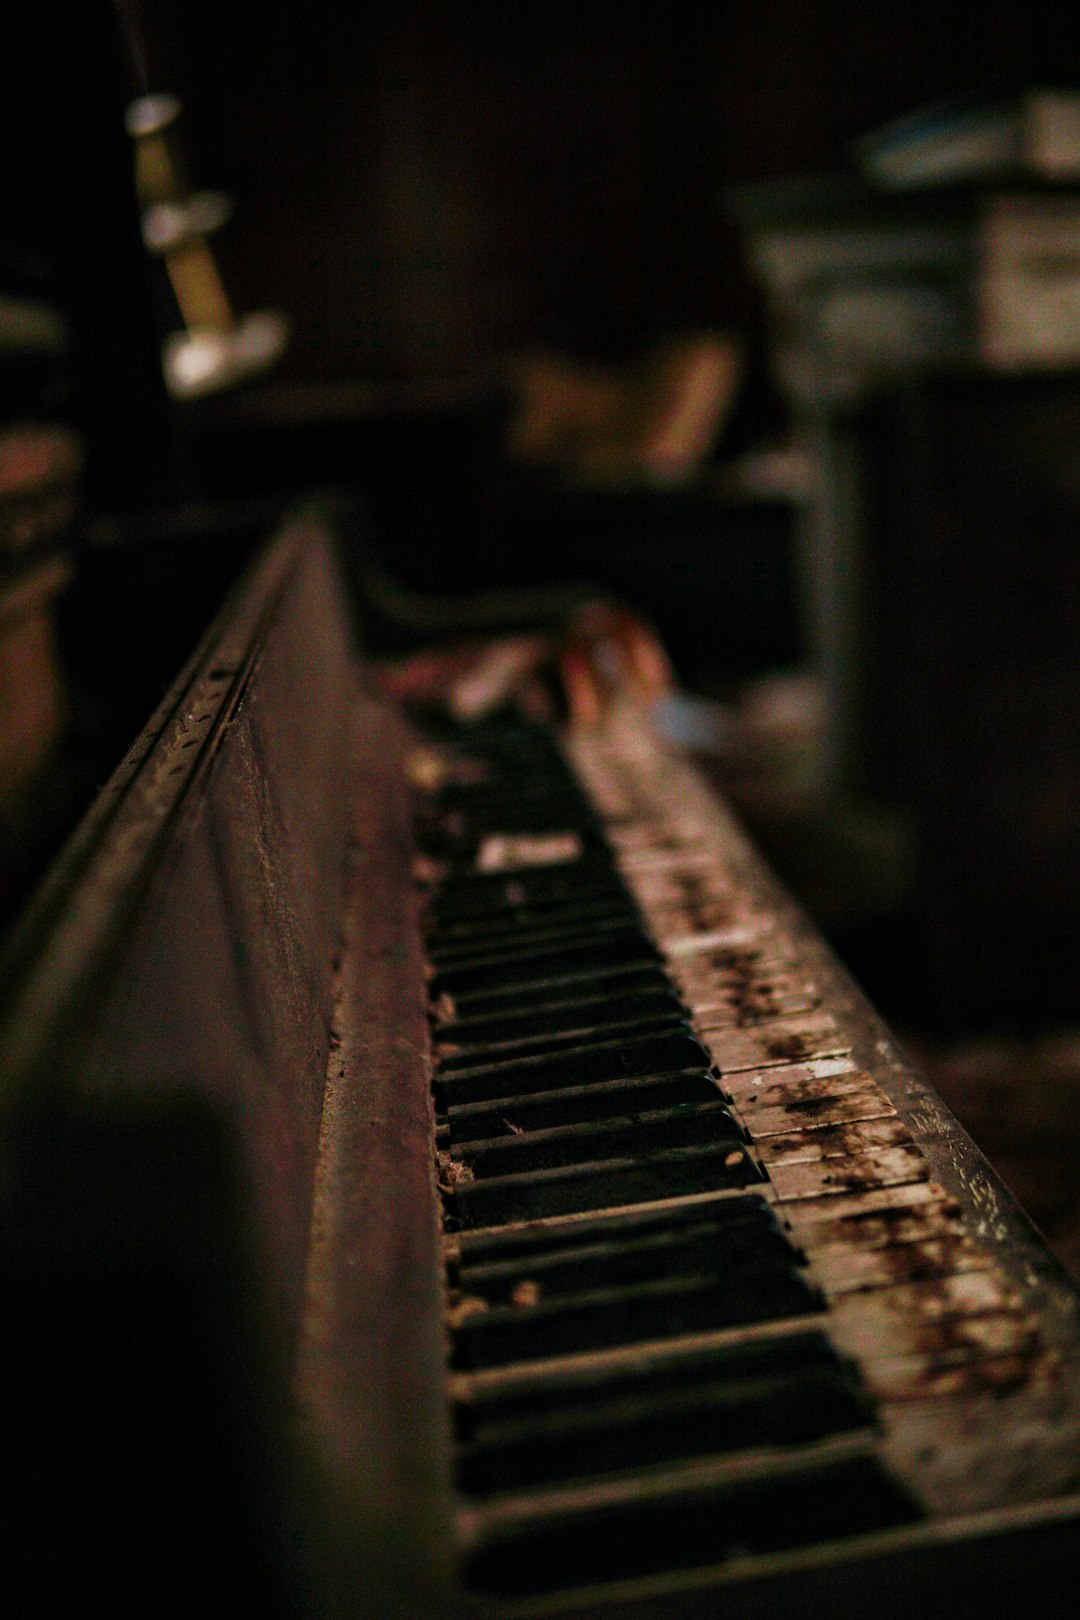 close-up photography of upright piano